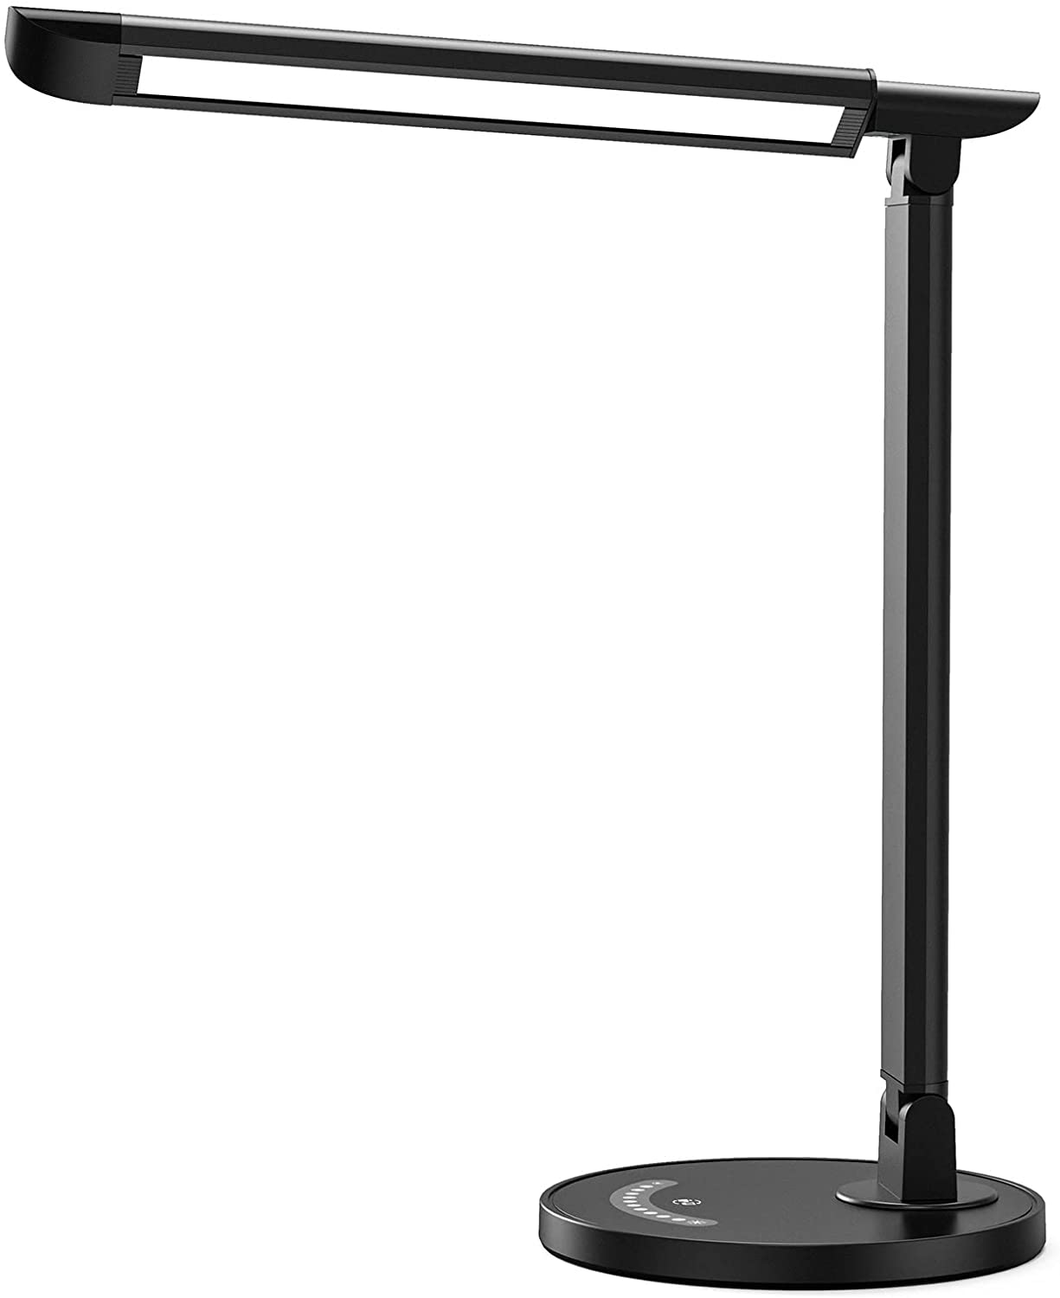 LED Desk Lamp, Soysout Eye-Caring Table Lamp with USB Charging Port, 5 Lighting Modes with 7 Brightness Levels, Touch Control, 12W (Black)